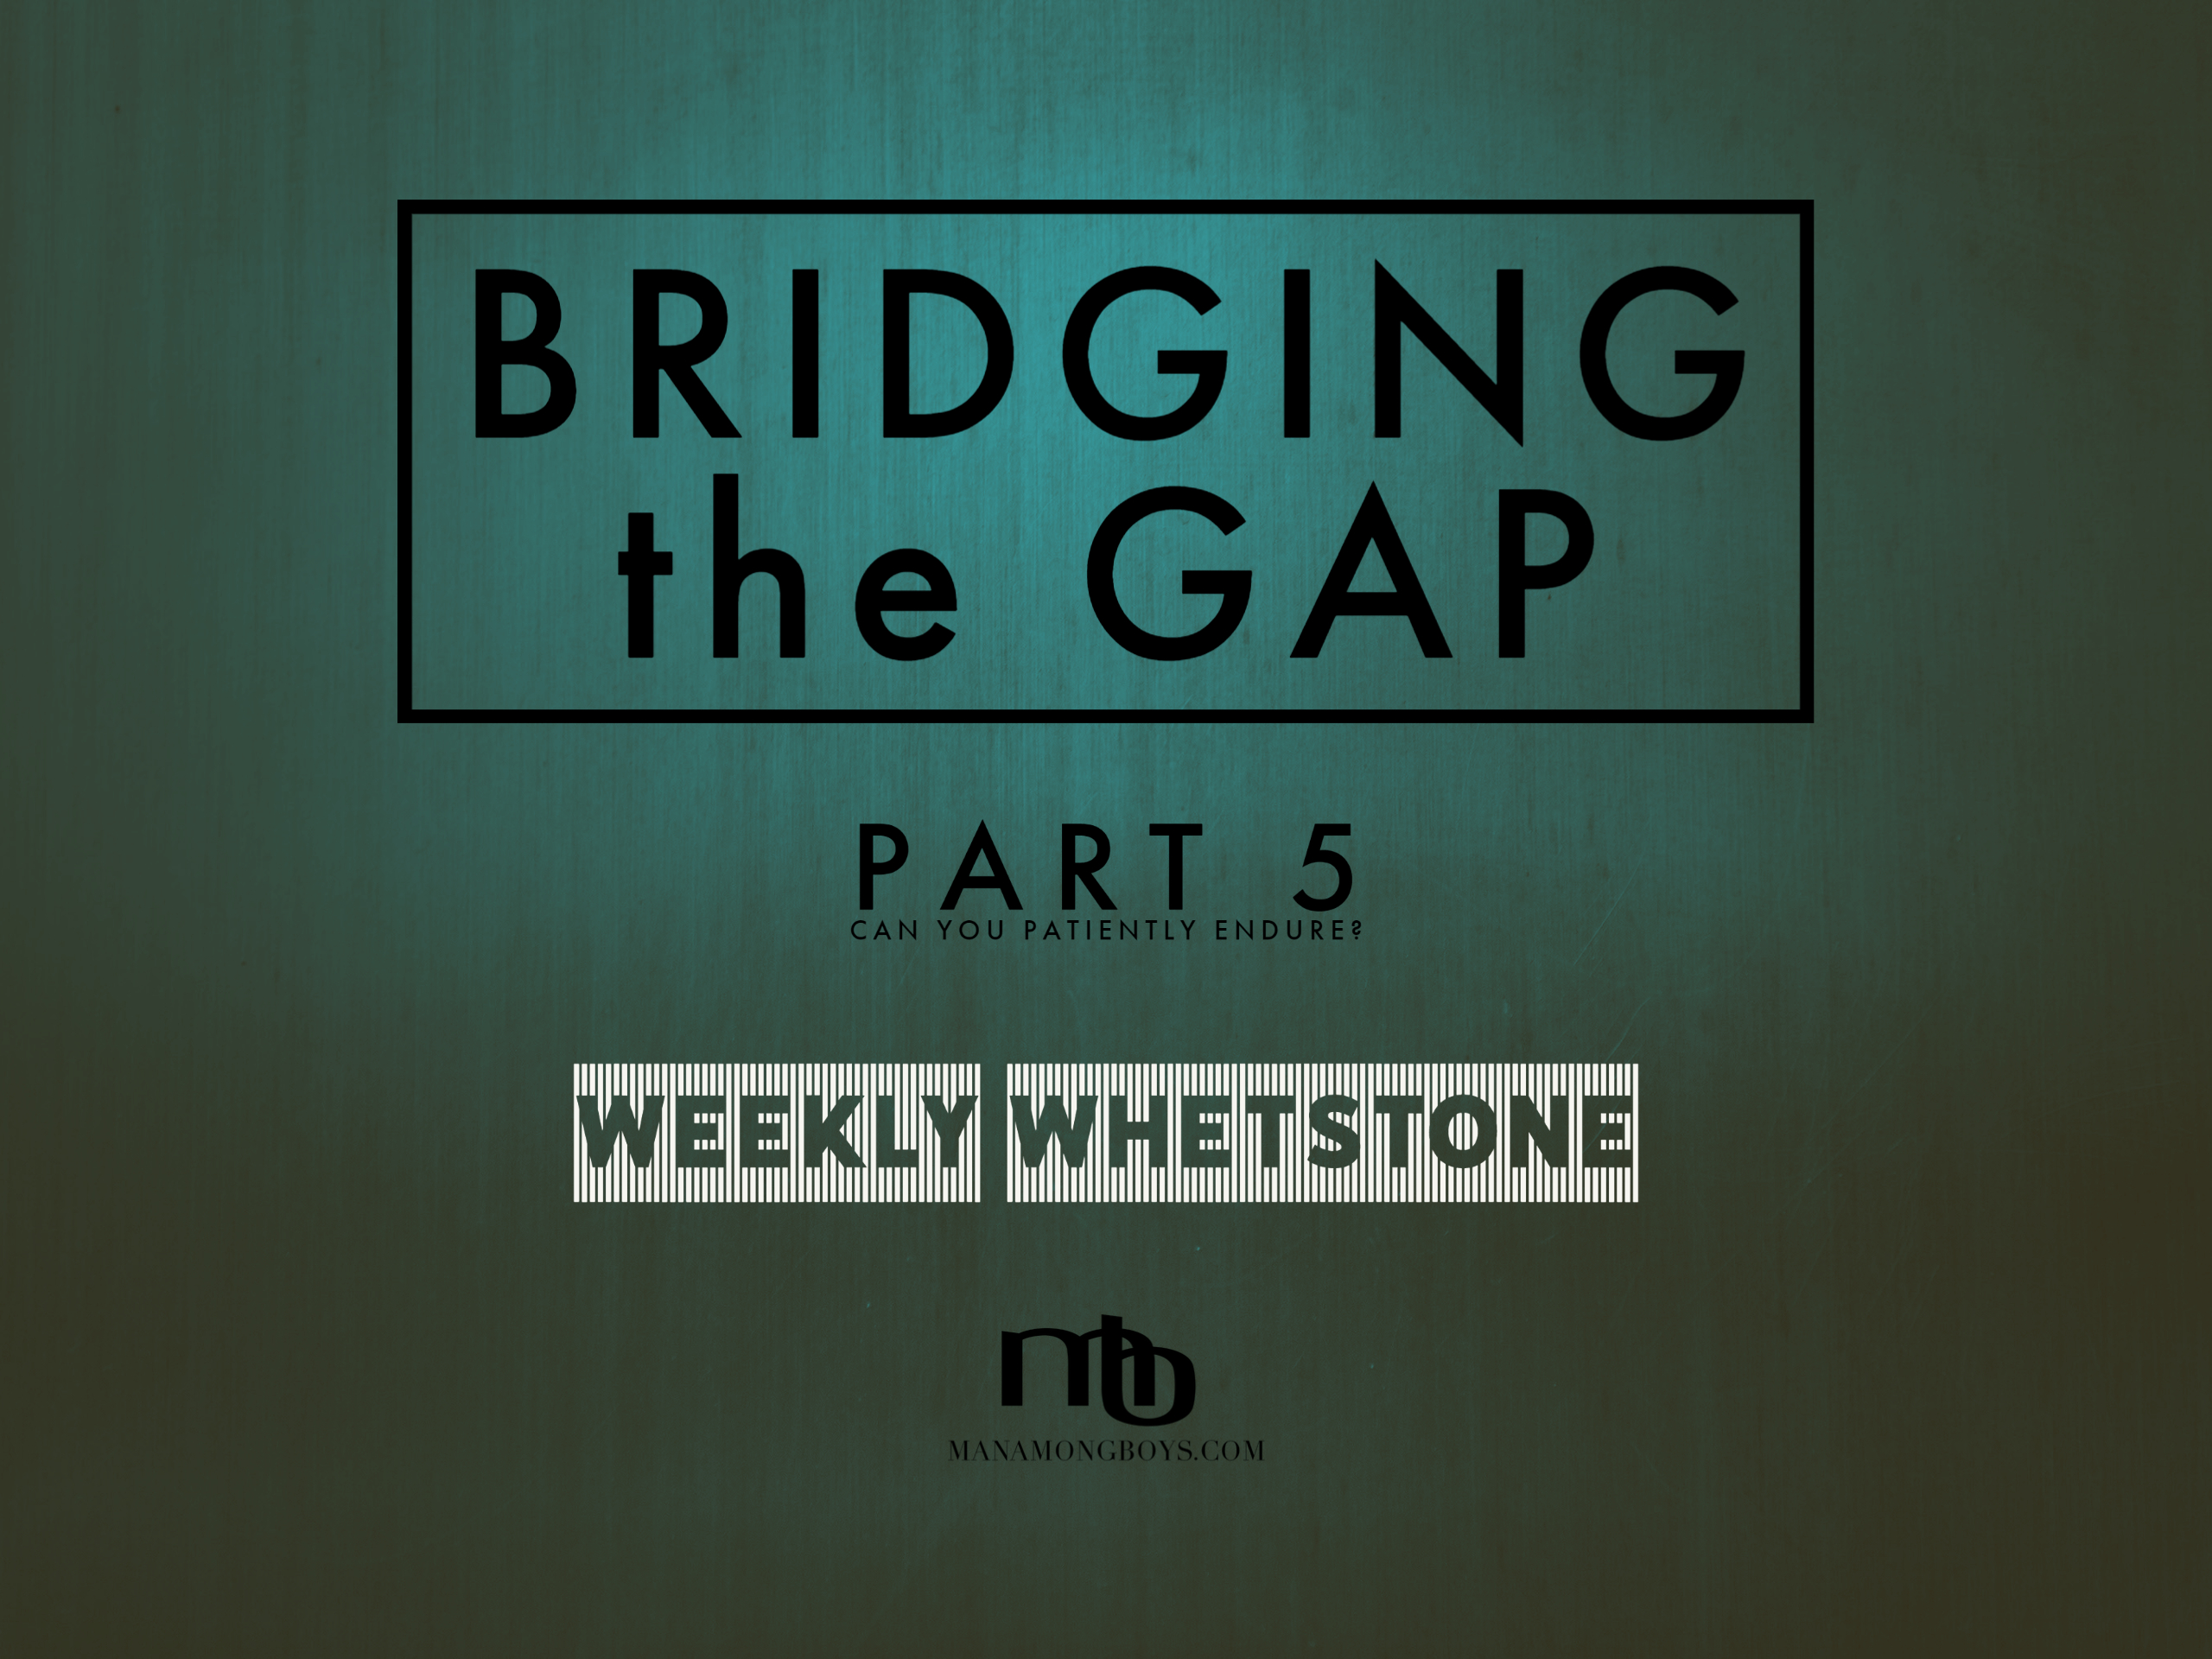 Bridging the Gap – Part 5:  Can You Patiently Endure?